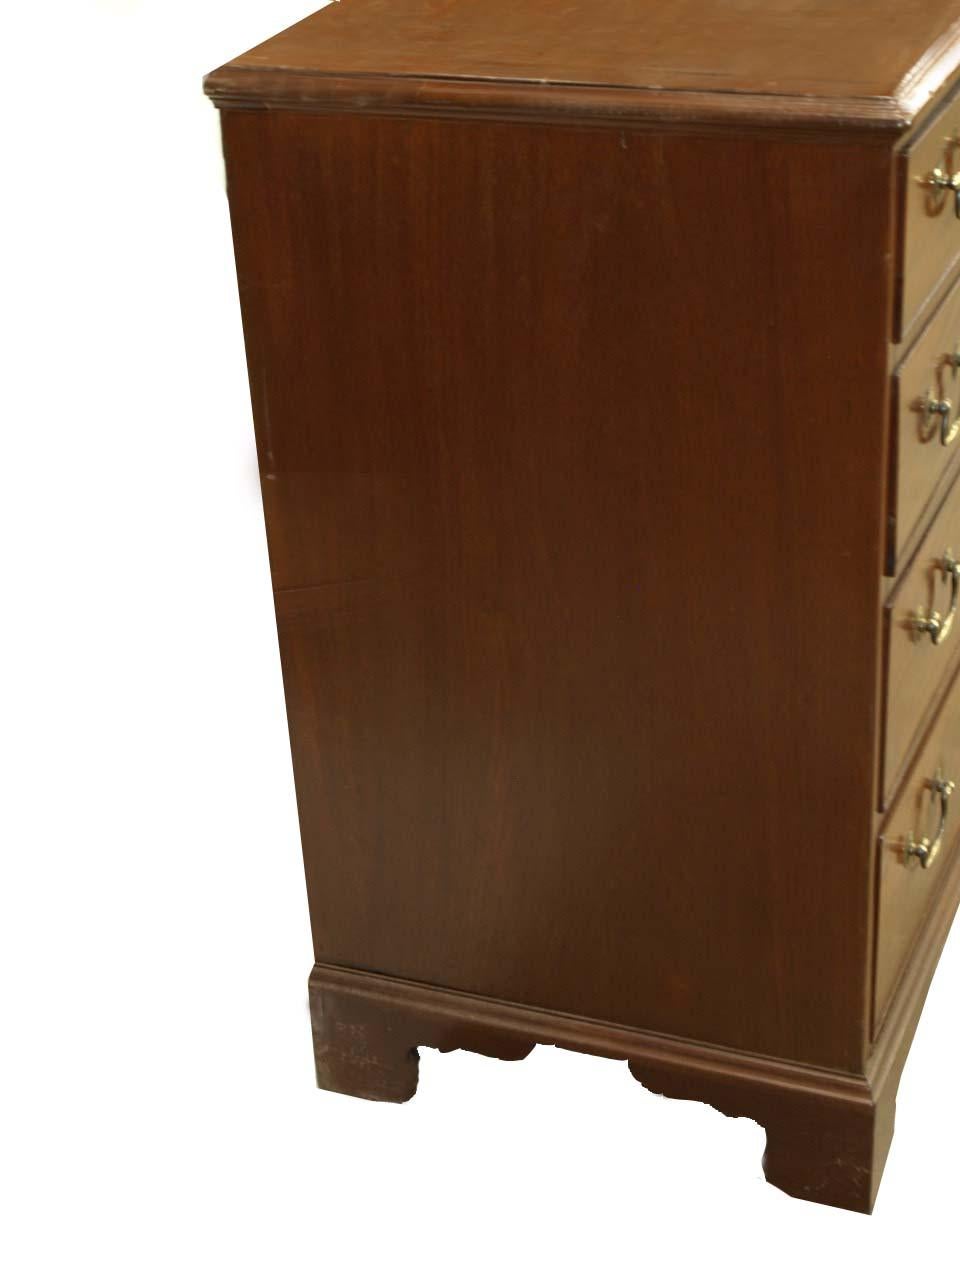 English Chippendale mahogany three over three drawer chest, With beautiful color and good proportions, this chest can serve multiple functions in home . The brass swan neck pulls are not original, but it would have had the same style pulls when it